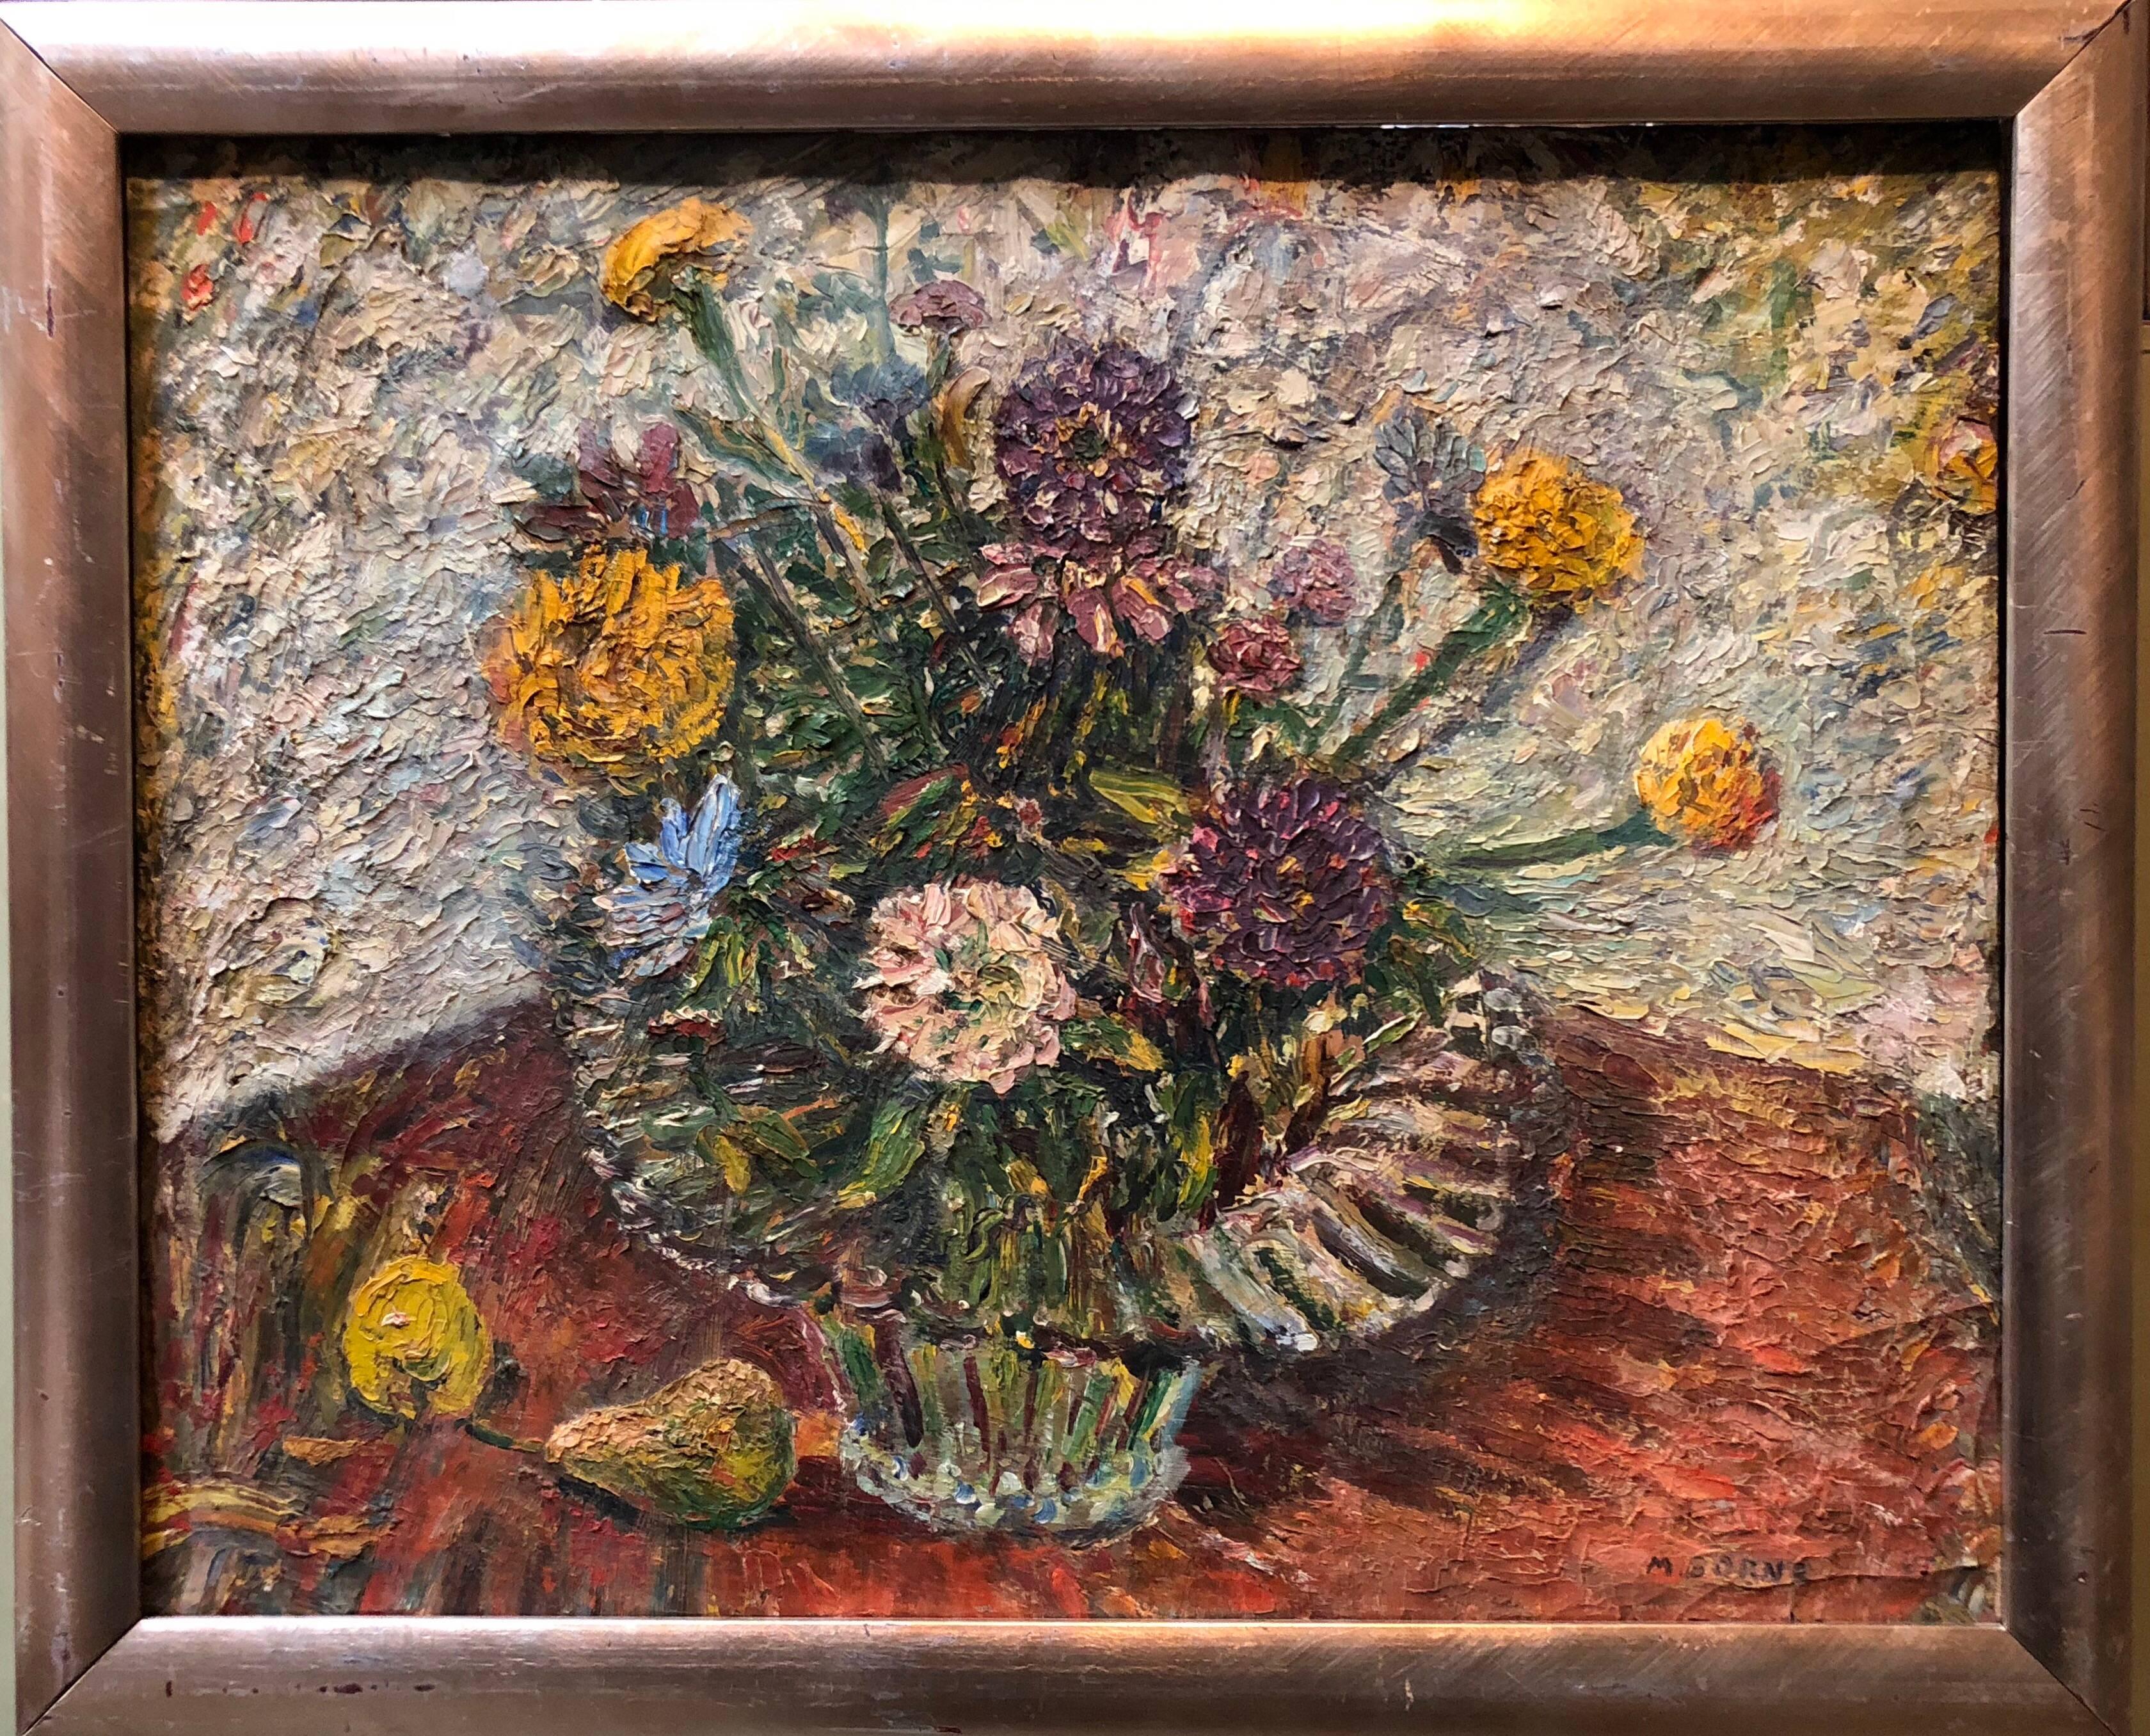 Floral painting. Flowers in a vase. Mortimer Borne, Printmaker, painter, sculptor, and educator was born in Rypin, Poland in 1902 and emigrated to the US in 1916. He studied at the National Academy of Design, The Art Students League, The Beaux-Arts